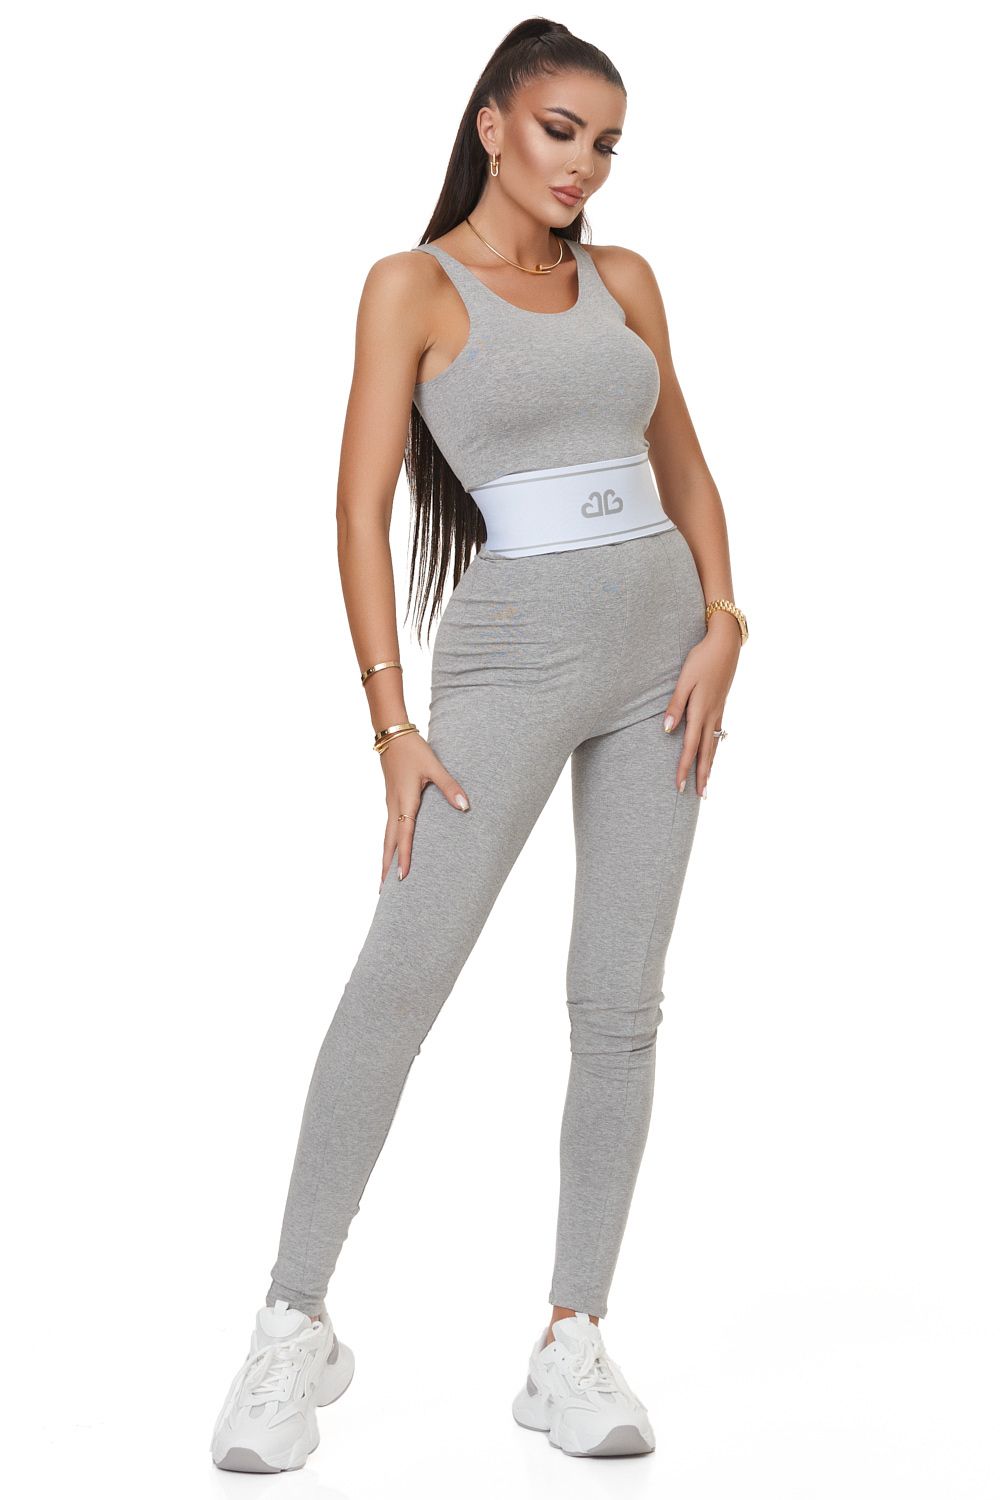 Nealy Bogas grey casual lady overalls